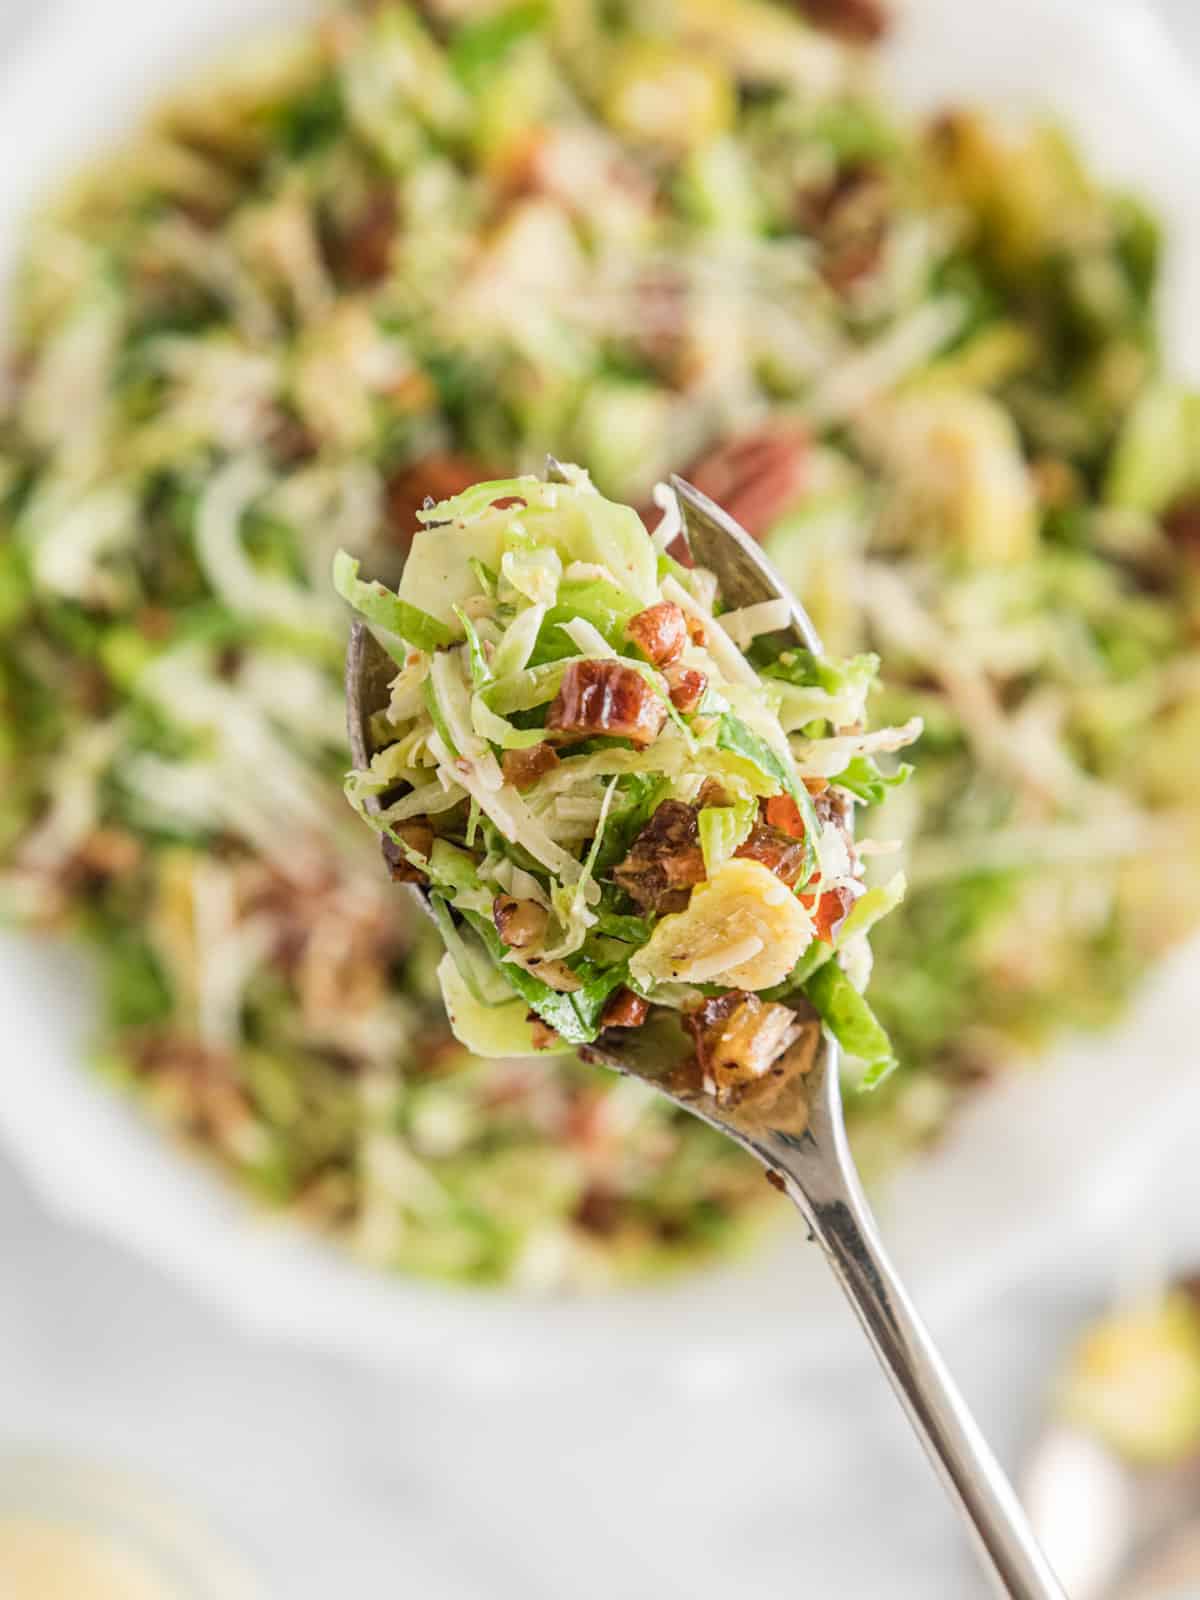 Spoonful of shaved Brussels sprouts salad with dates, pecans, and parmesan cheese.